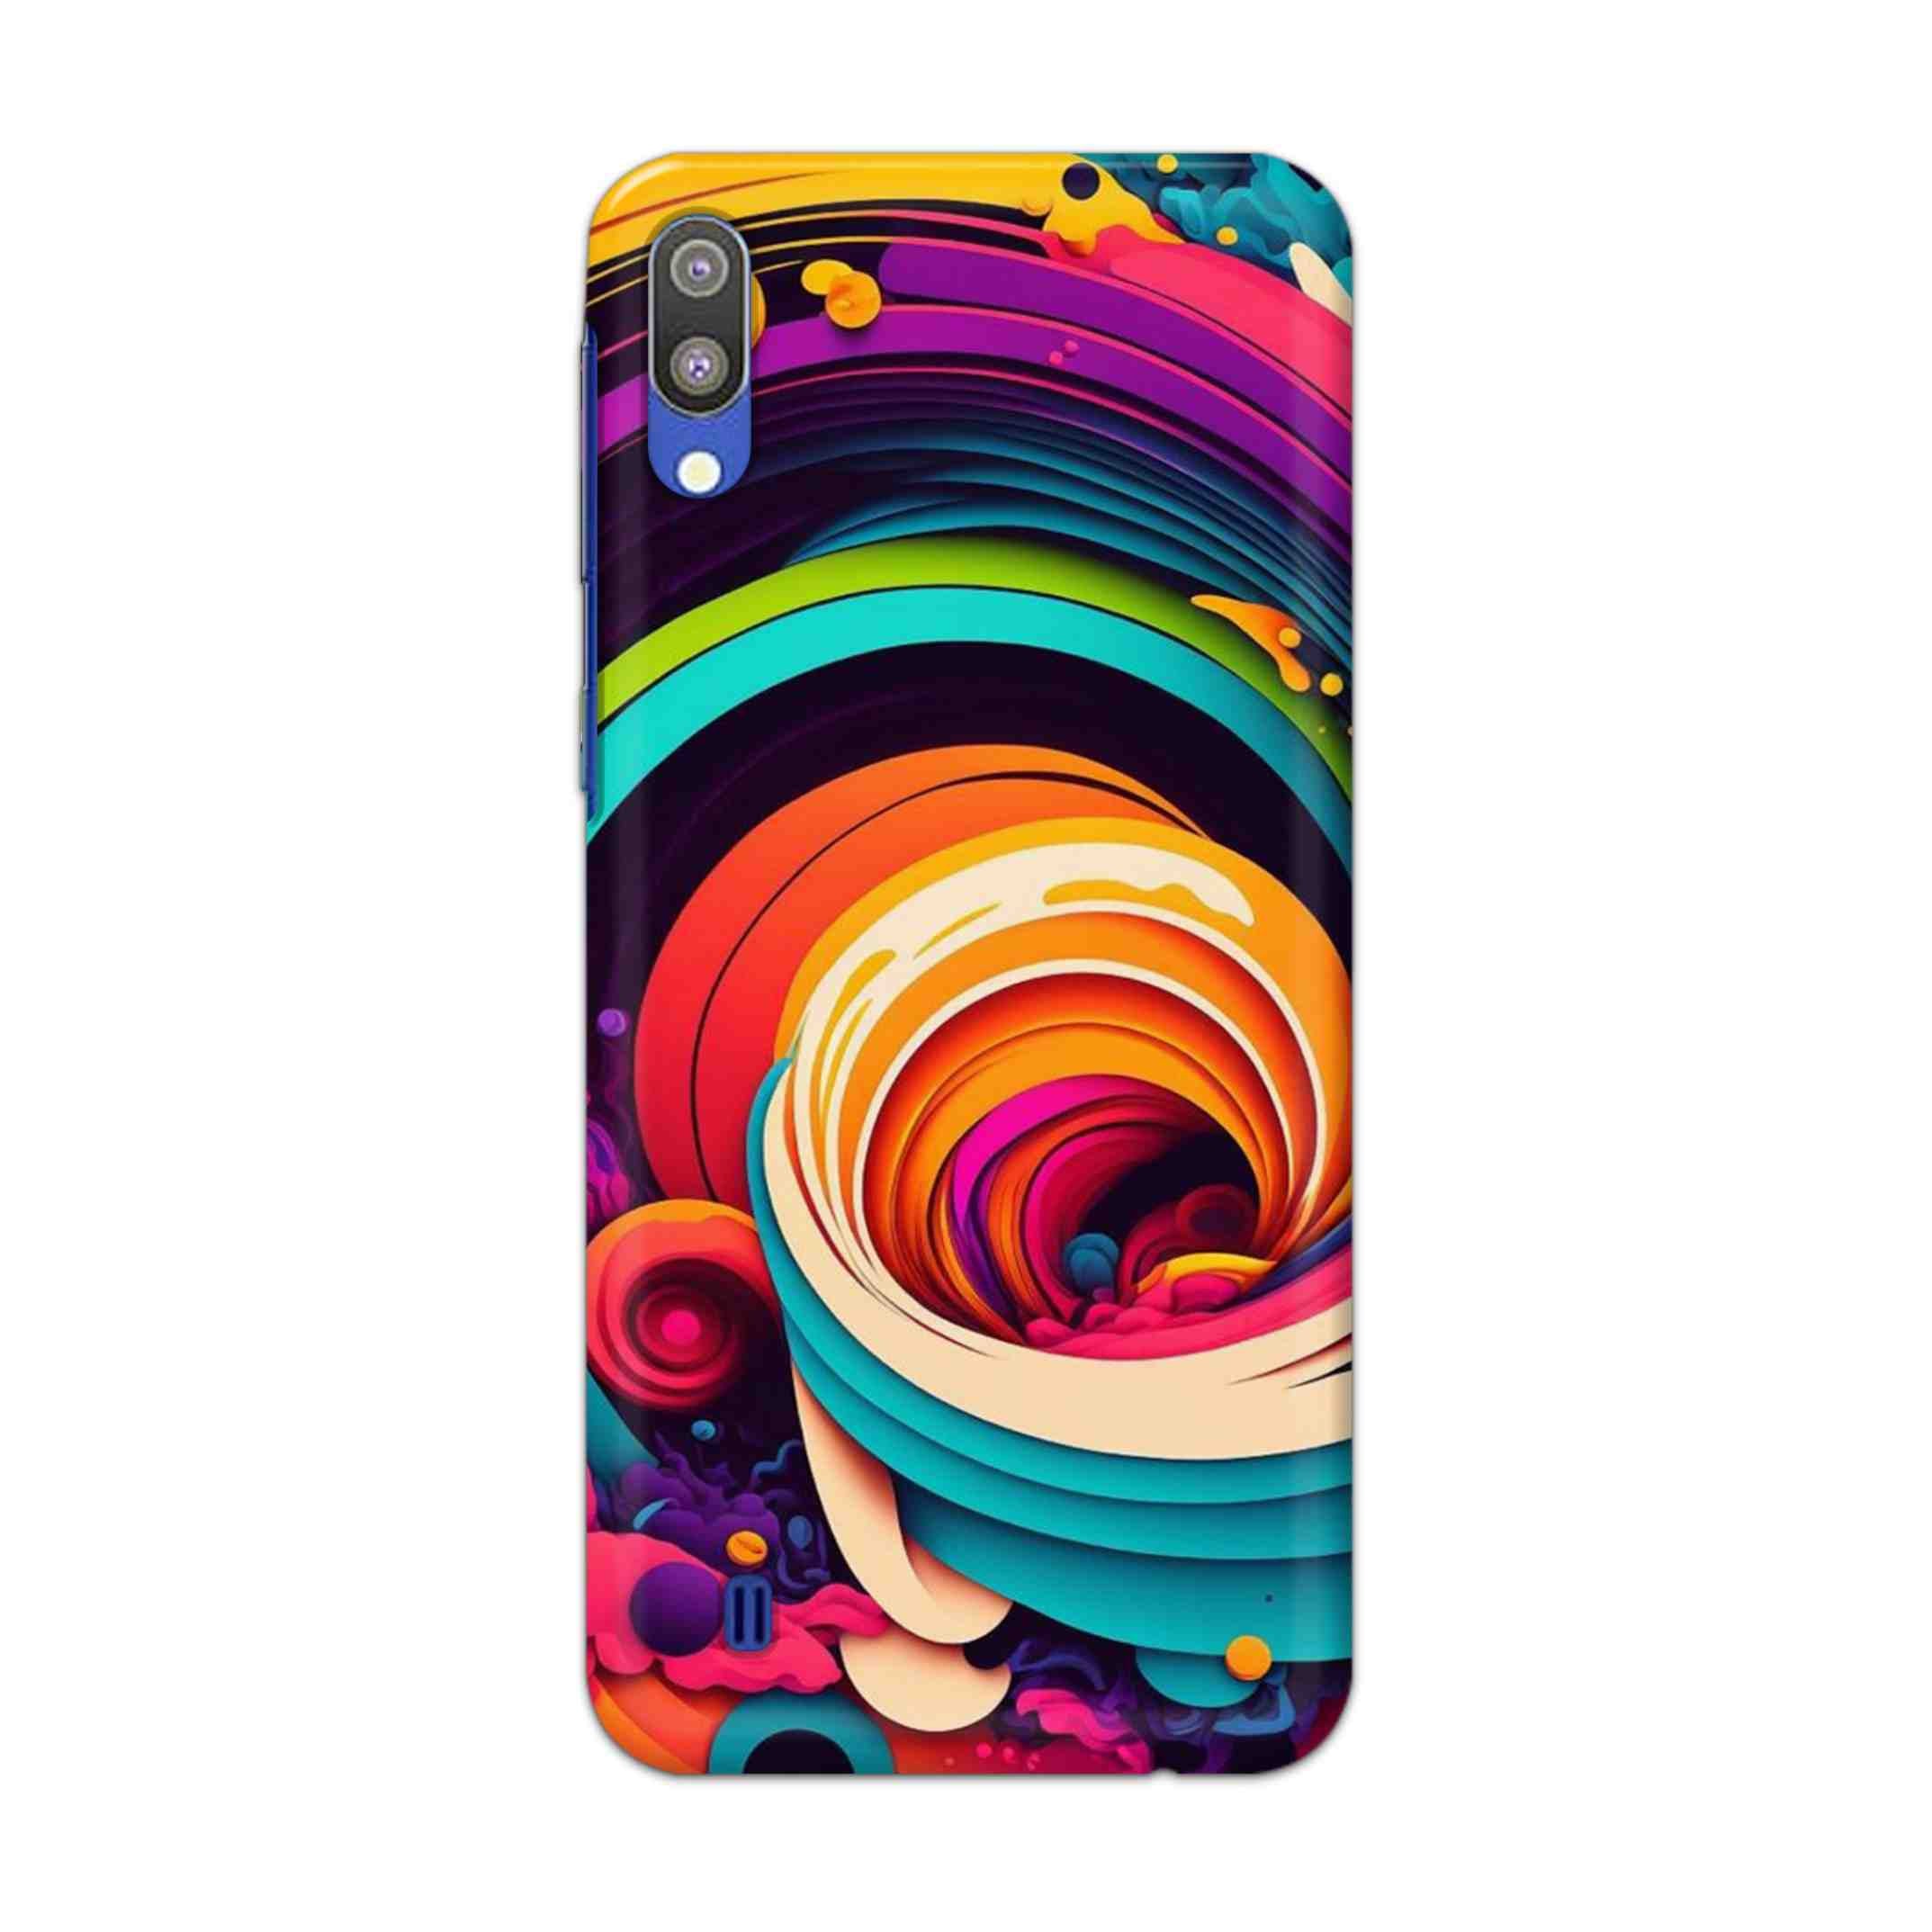 Buy Colour Circle Hard Back Mobile Phone Case Cover For Samsung Galaxy M10 Online